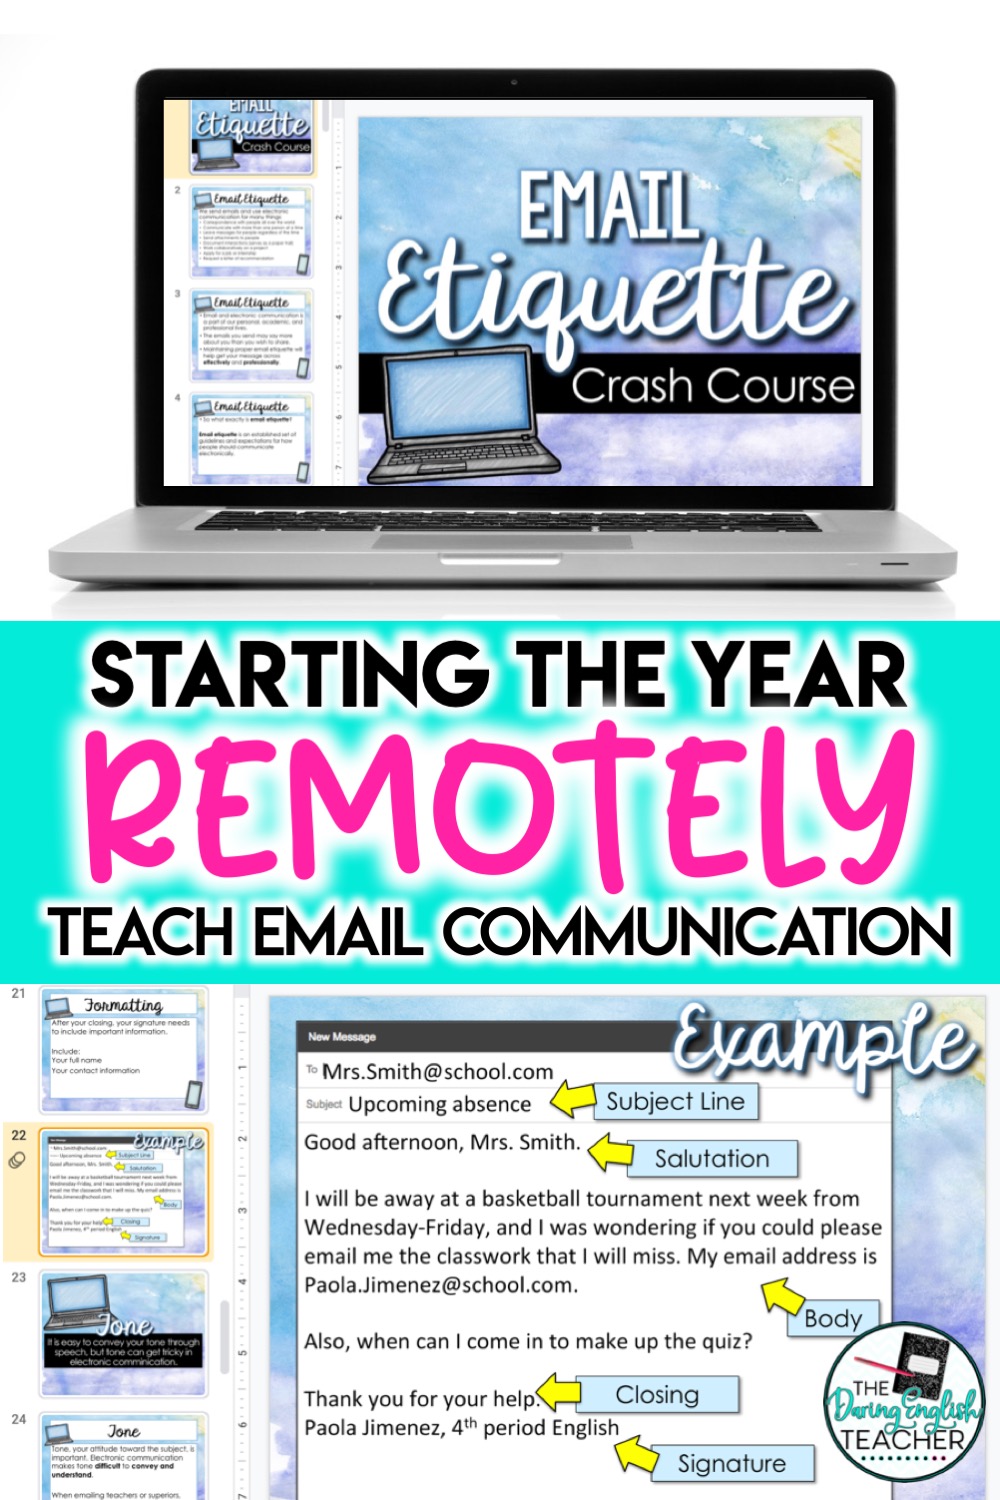 Digital email etiquette teaching unit. Teaching students how to write an email.